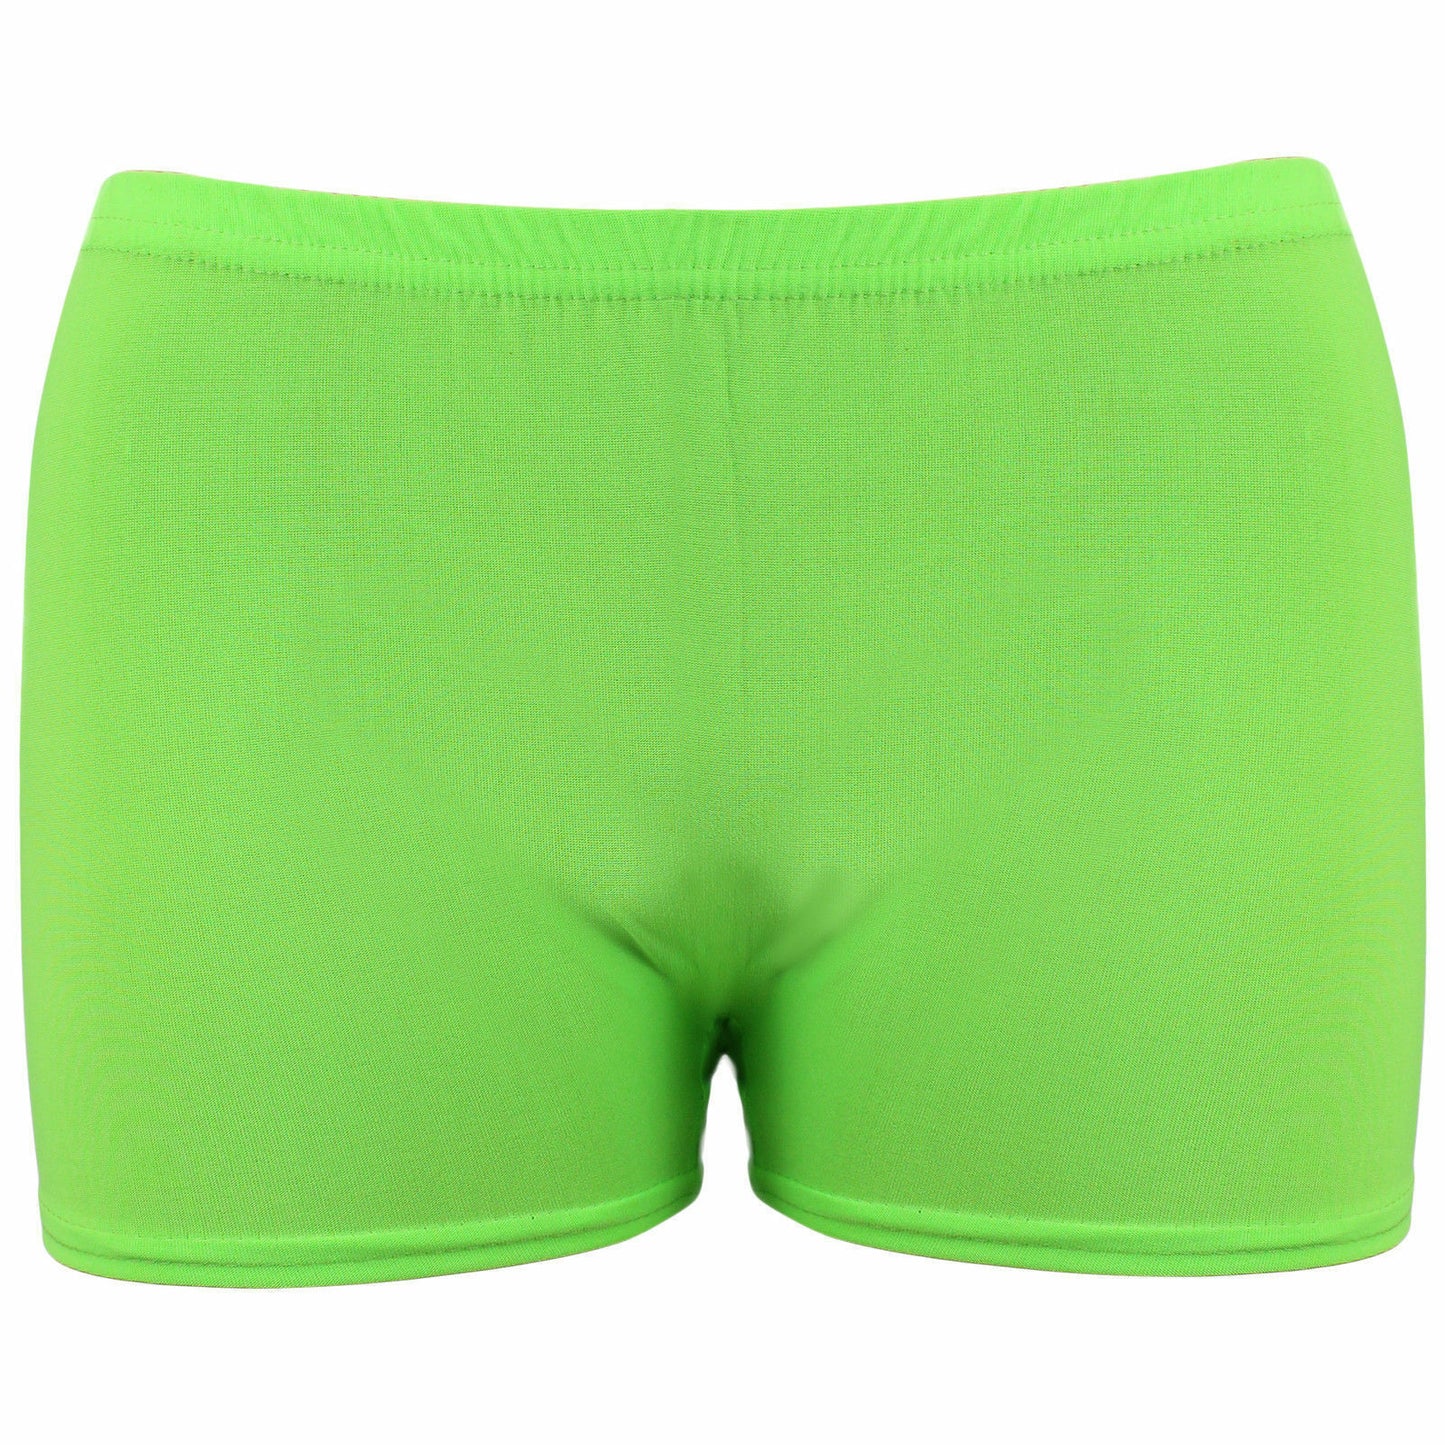 Lycra Shorts In neon Green, Perfect For School Gym Or Dance Classes, Ages 5 to 14, 95% Polyester & 5% Spandex